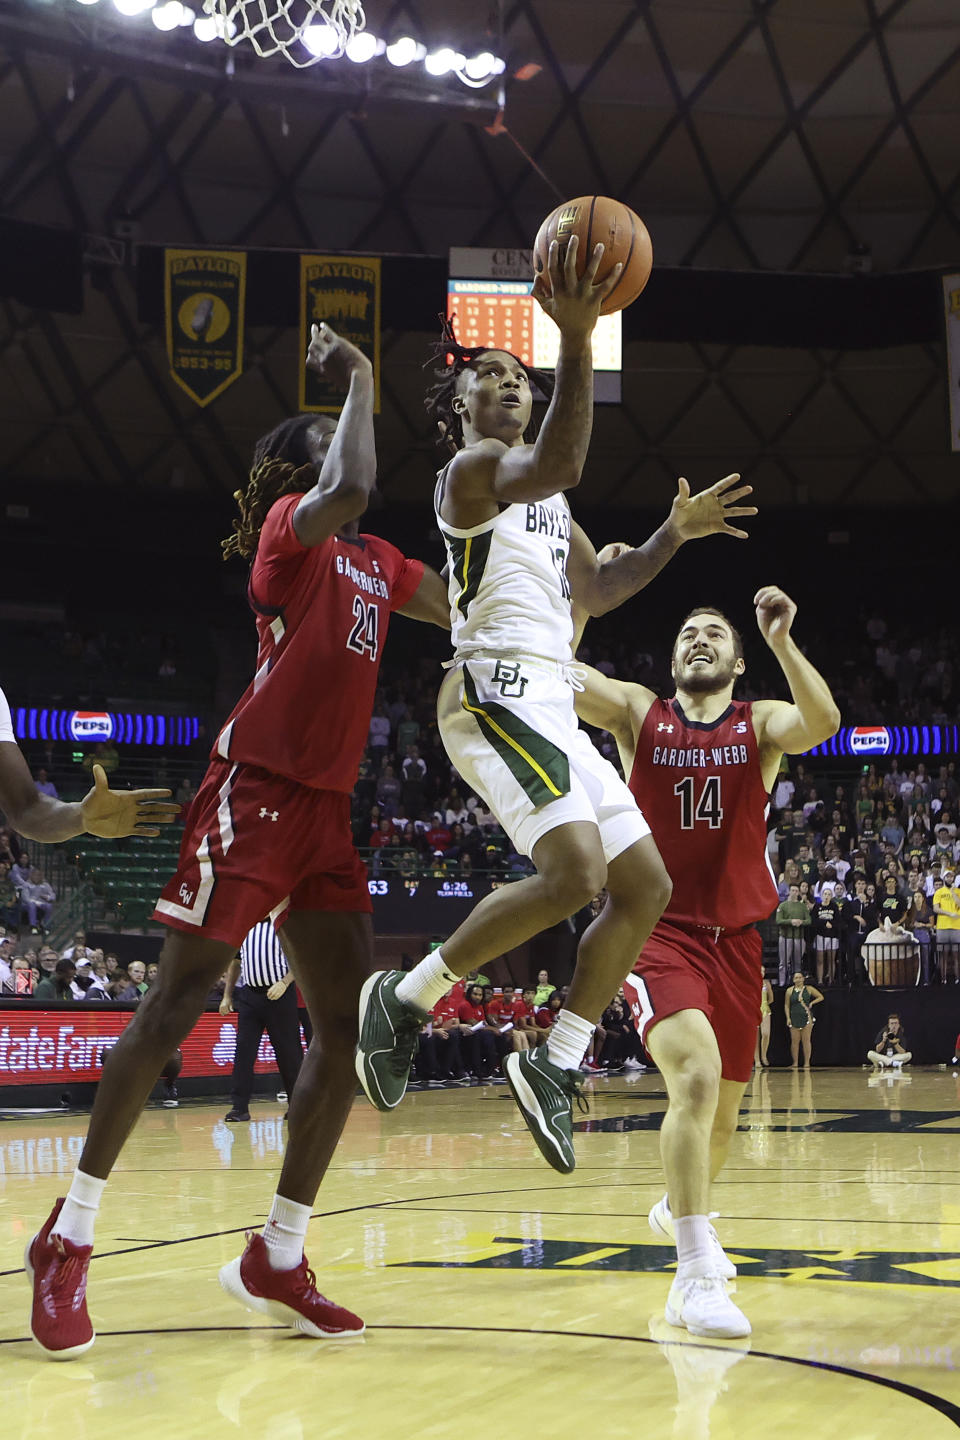 Baylor guard Dantwan Grimes, center, goes up to score between Gardner-Webb forward Isaiah Richards (24) and guard Shahar Lazar (14) in the second half of an NCAA college basketball game, Sunday, Nov. 12, 2023, in Waco, Texas. (AP Photo/Jerry Larson)